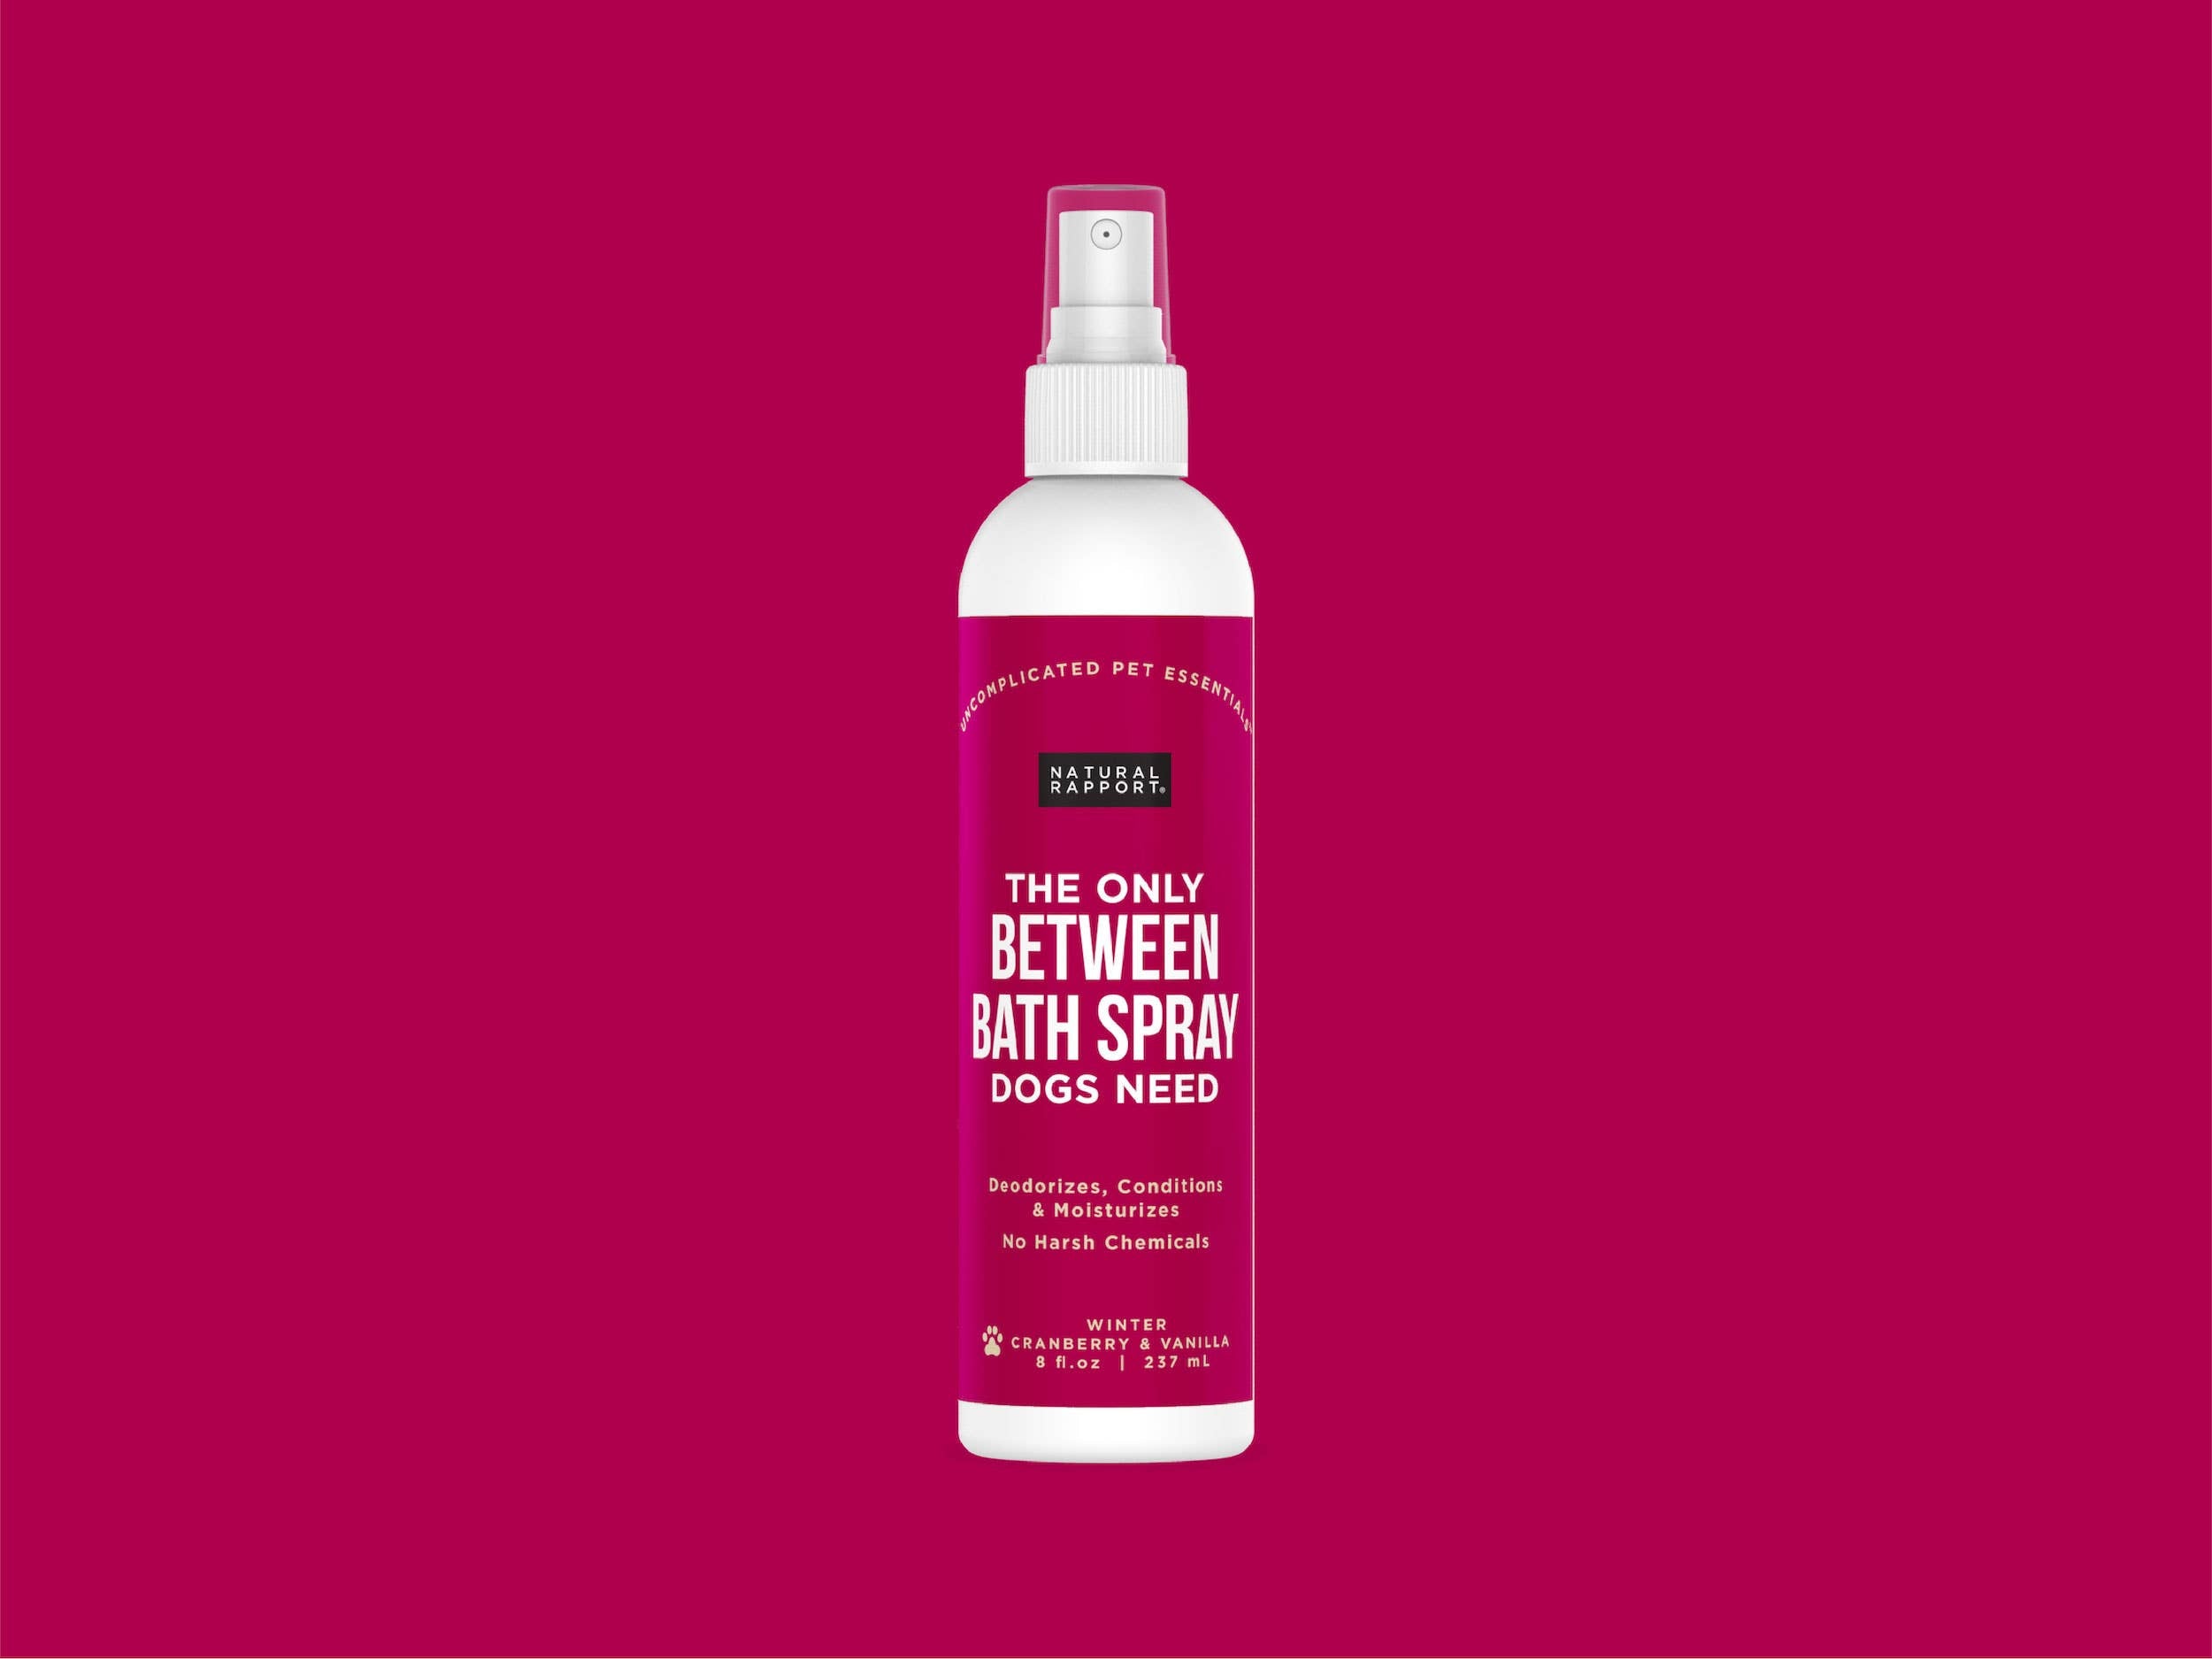 Natural Rapport - The Only Between Bath Spray Dogs Need - Winter Scent: 3 ounce